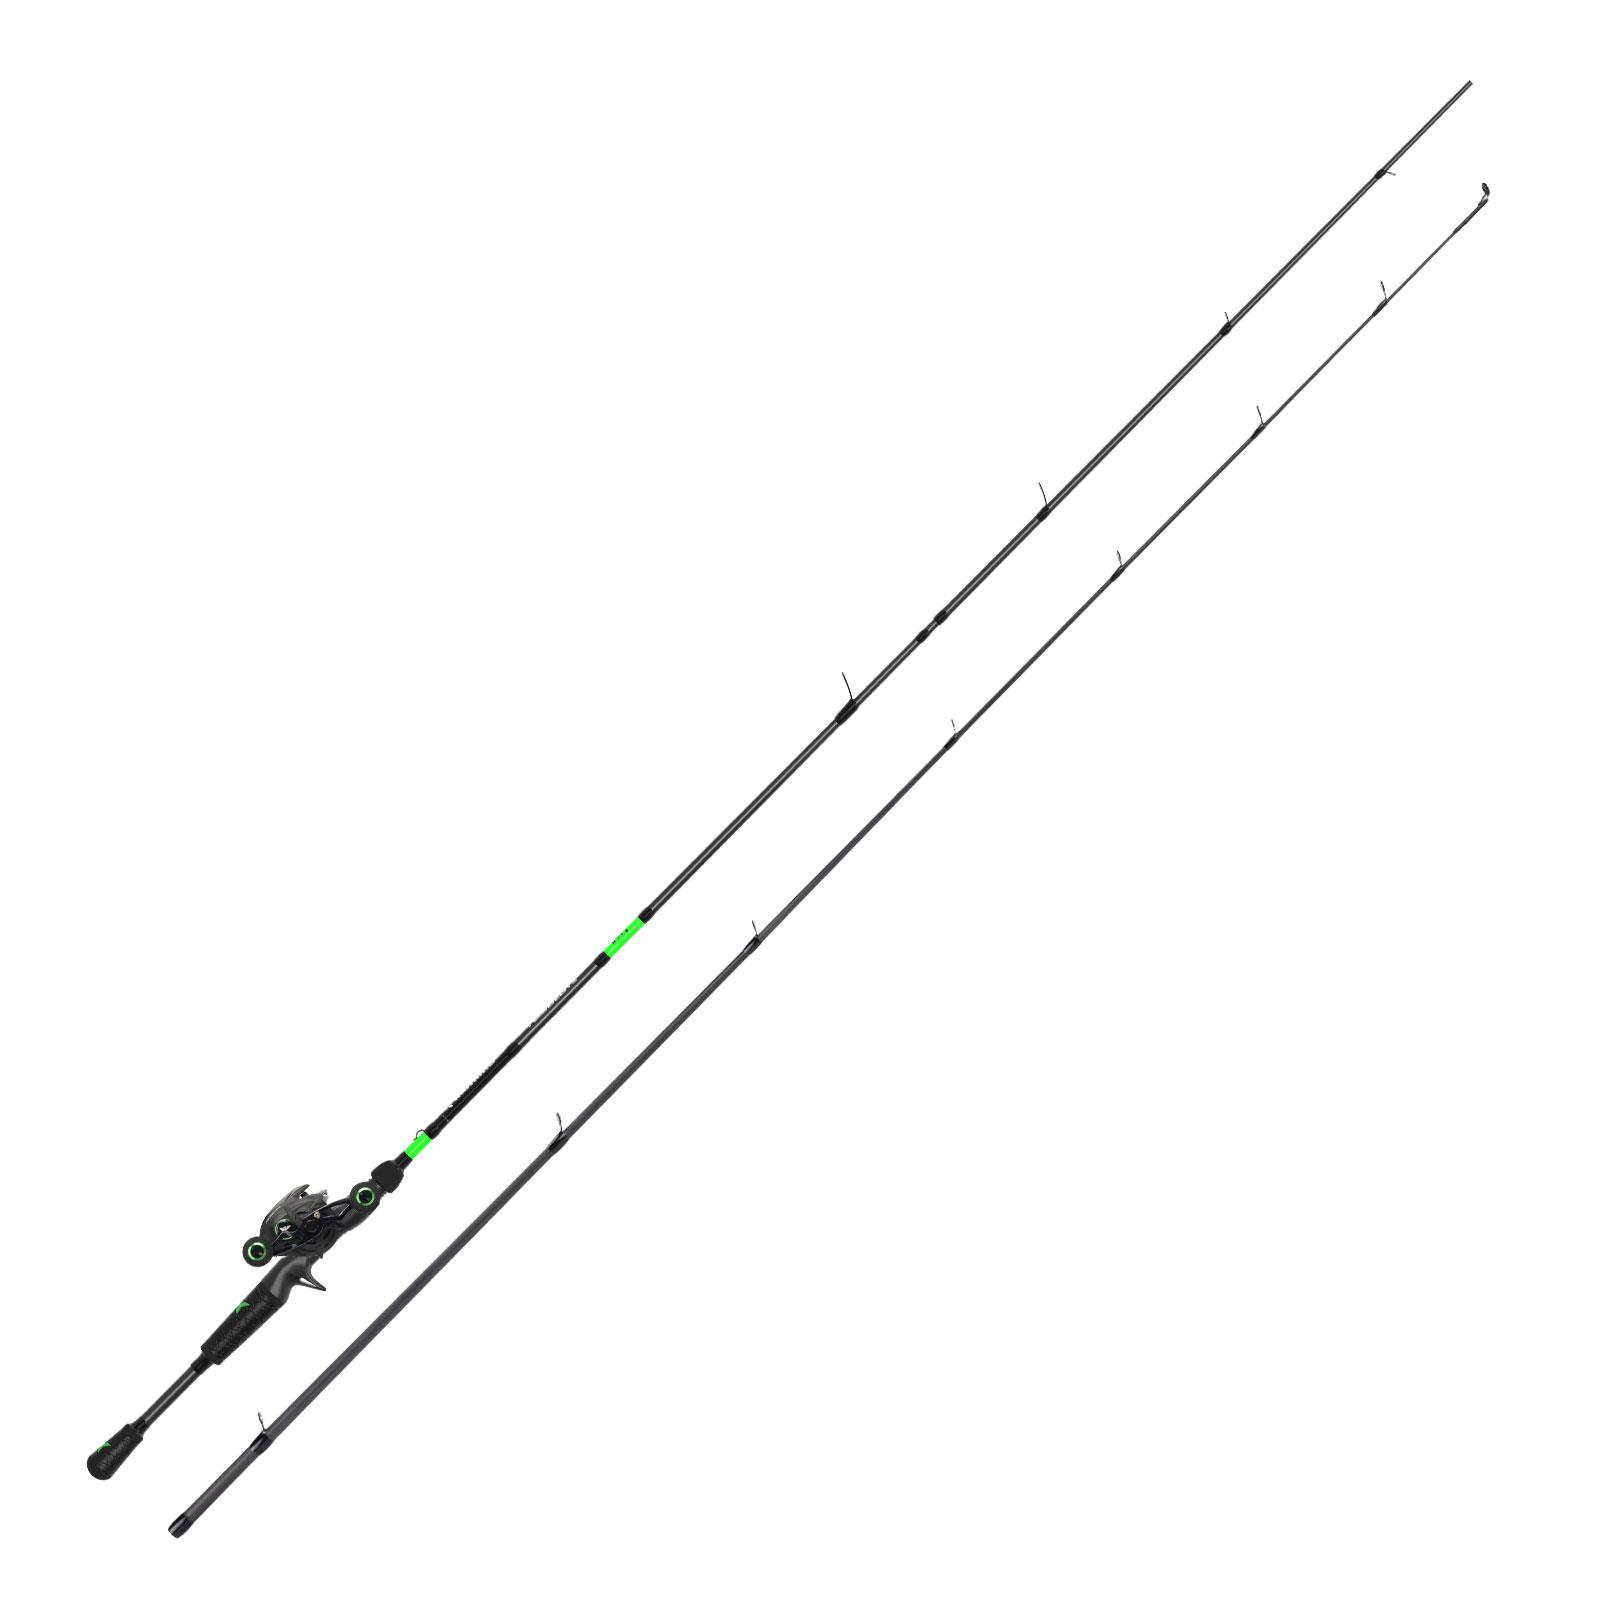 Resolute 7 Foot 2-Piece Casting Rod